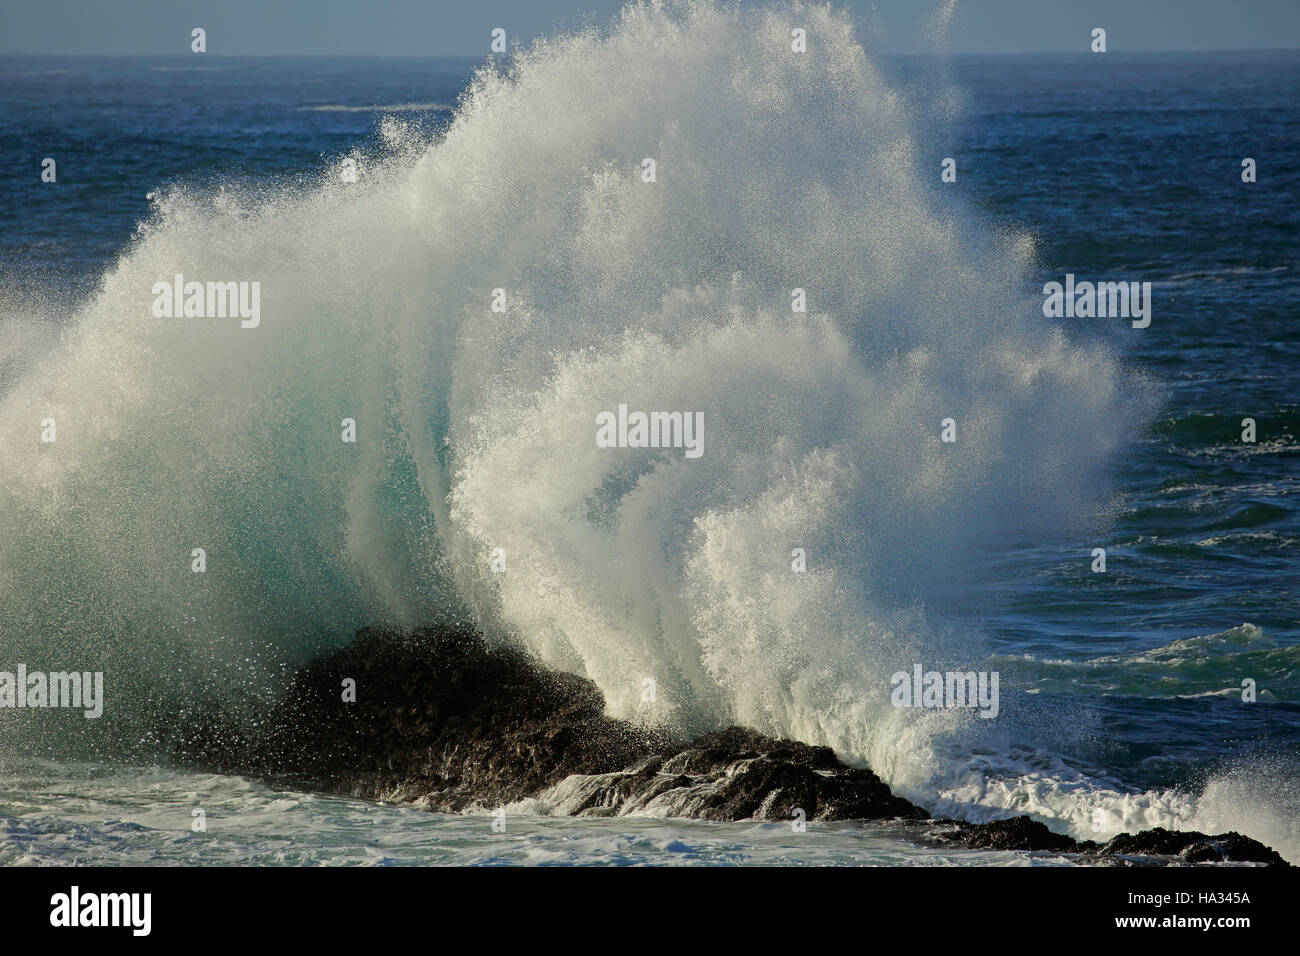 Seascape with large breaking wave and water spray Stock Photo